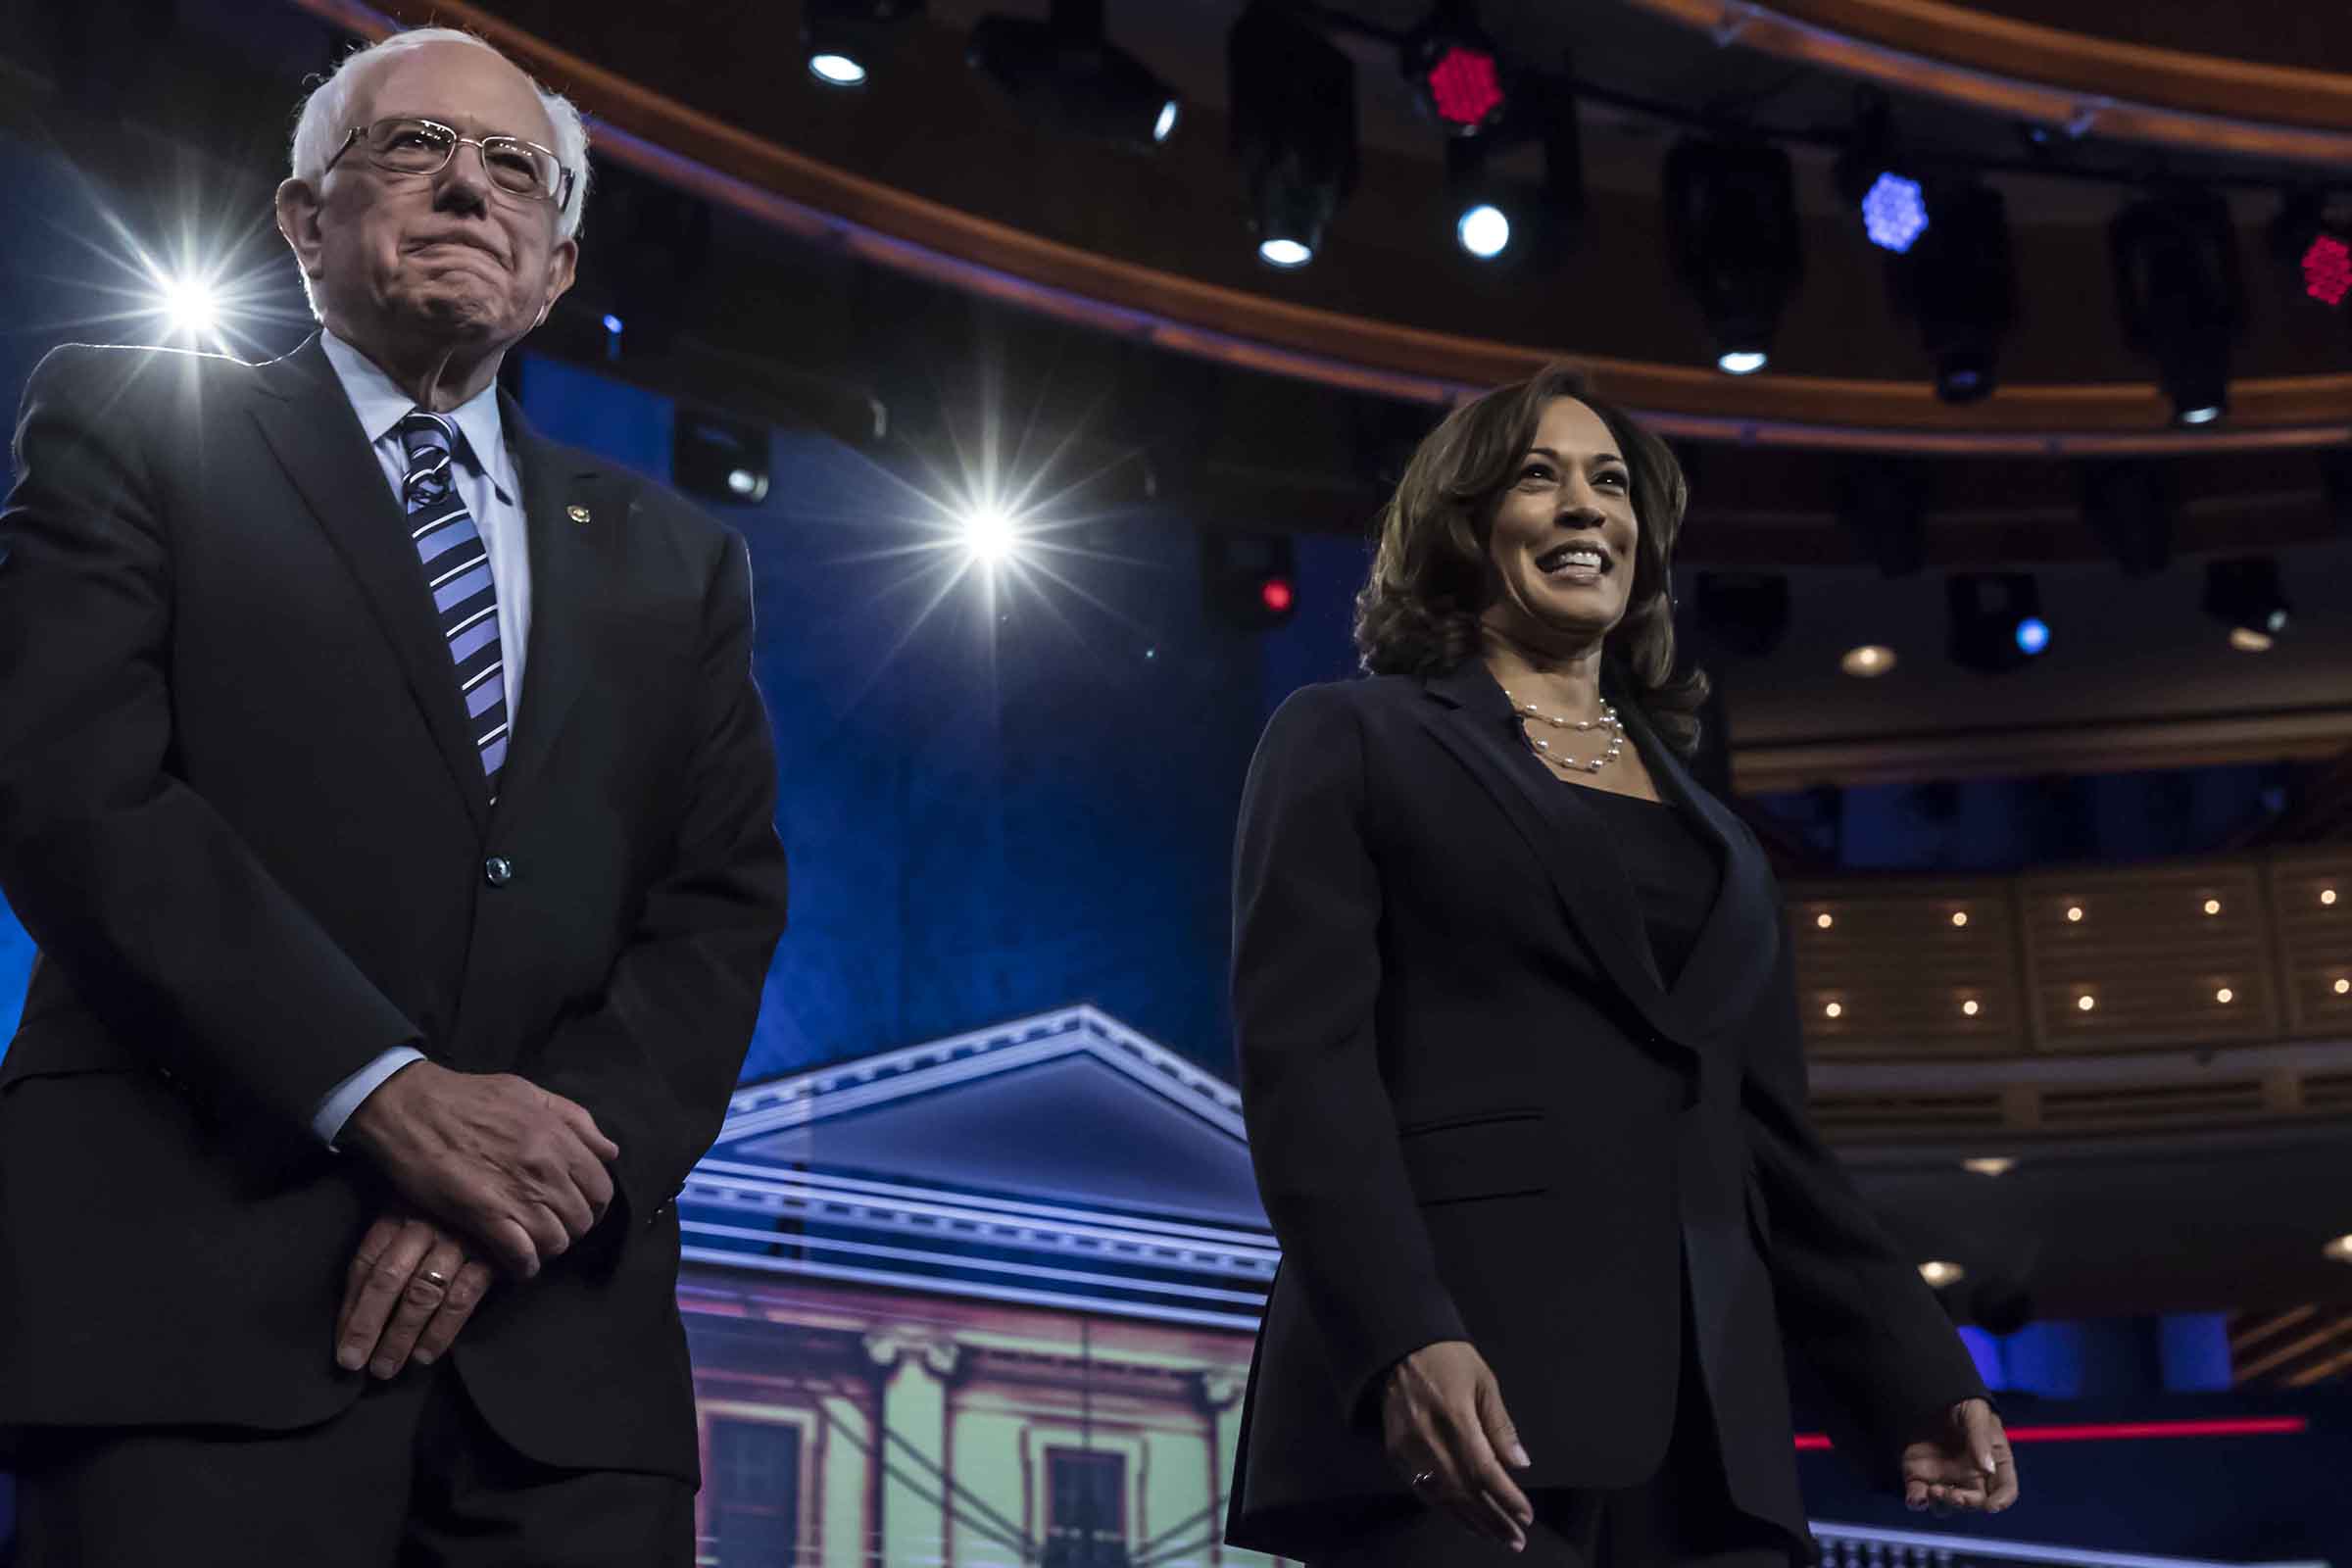 Democratic presidential hopefuls (fromL) US Senator for Vermont Bernie Sanders and US Senator for California Kamala Harris participate in the second Democratic primary debate of the 2020 presidential campaign season hosted by NBC News at the Adrienne Arsht Center for the Performing Arts in Miami, Florida, June 27, 2019. (Christopher Morris for TIME)